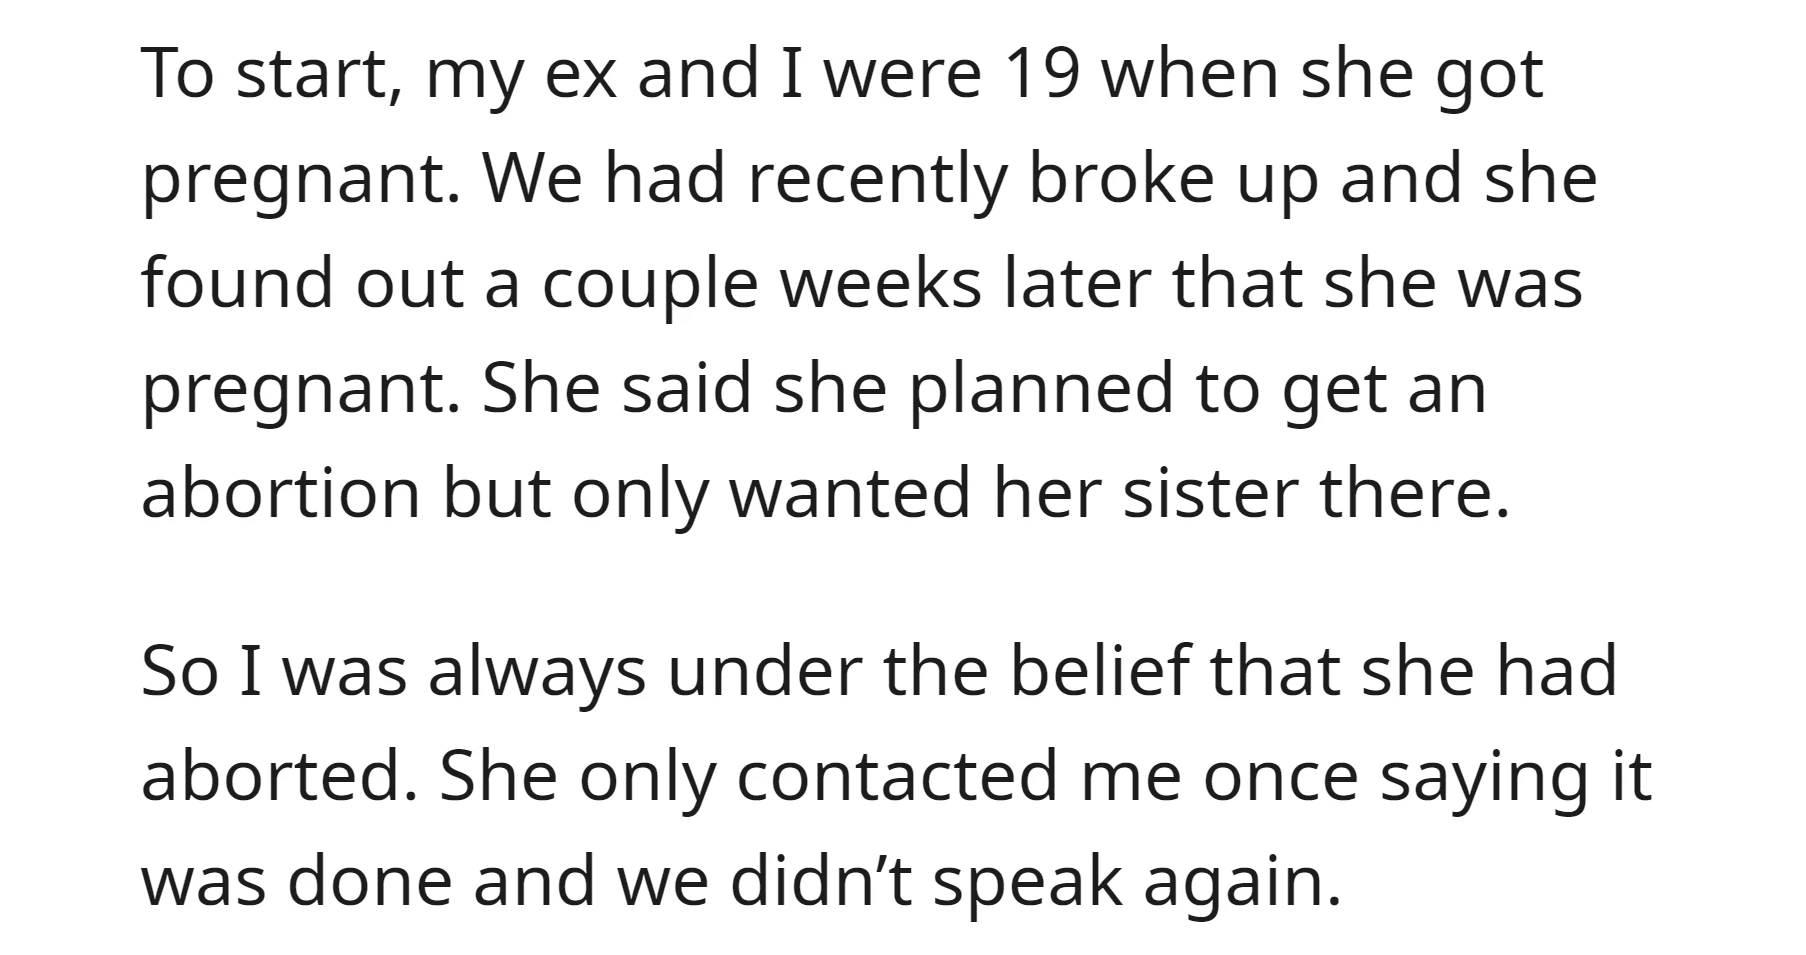 OP and his ex broke up before she knew she got pregnant. So the ex planned to get an abortion but only wanted her sister there